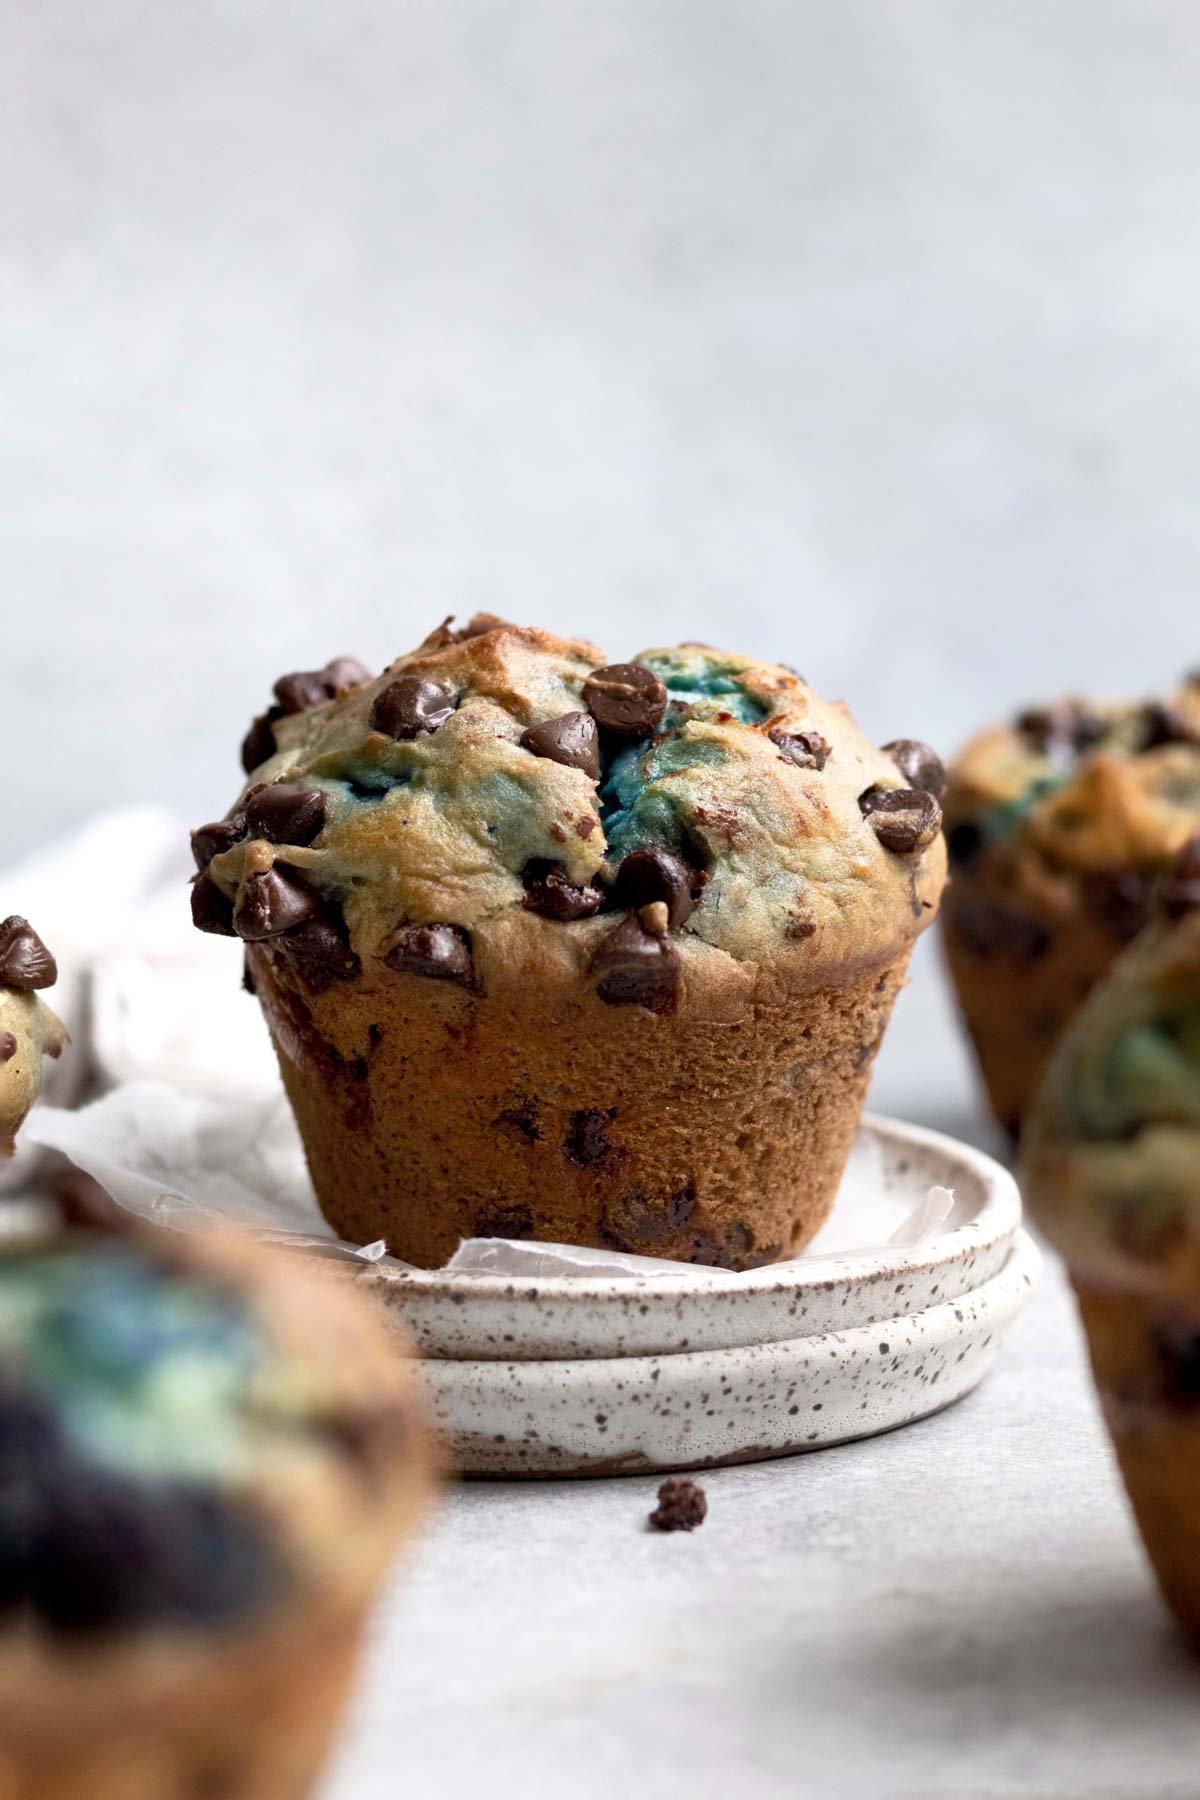 Golden brown chocolate chip muffin with blue streaks stands peacefully on a plate.